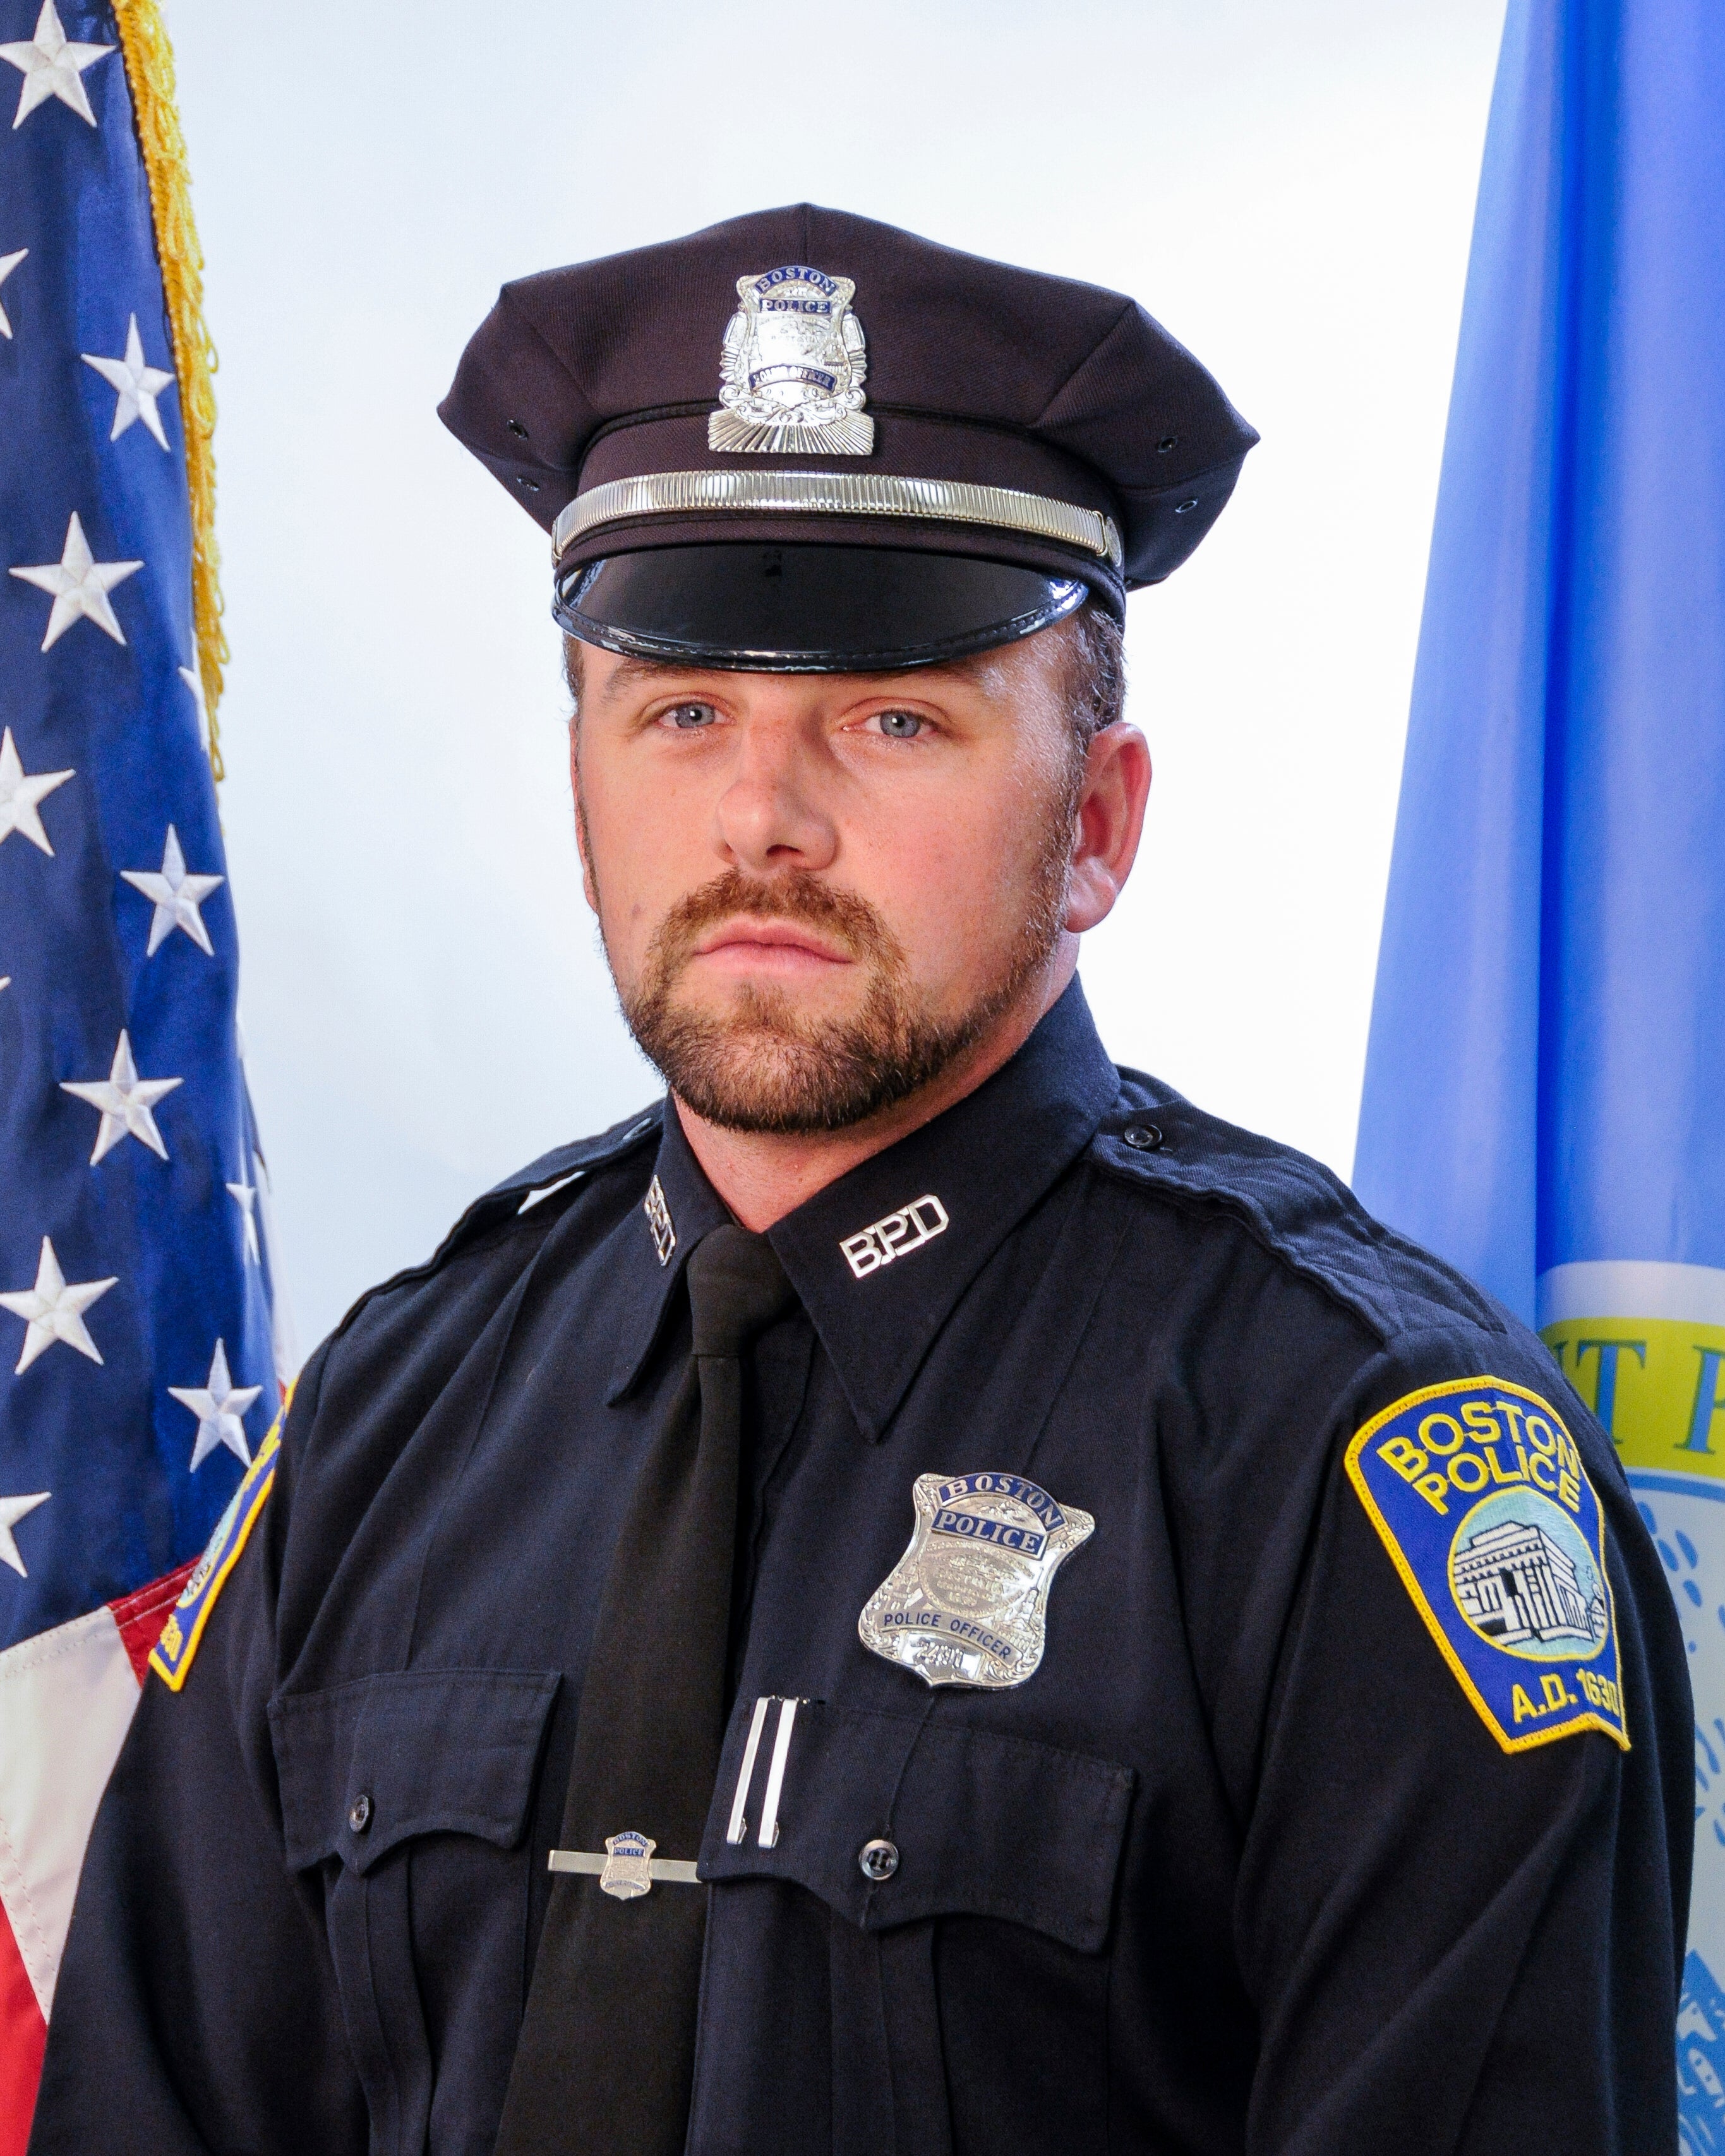 The body of 46-year-old John O’Keefe, a Boston police officer, was found in the early morning hours of January 29, 2022, outside a home in Canton, Massachusetts. An autopsy found he died of hypothermia and blunt force trauma